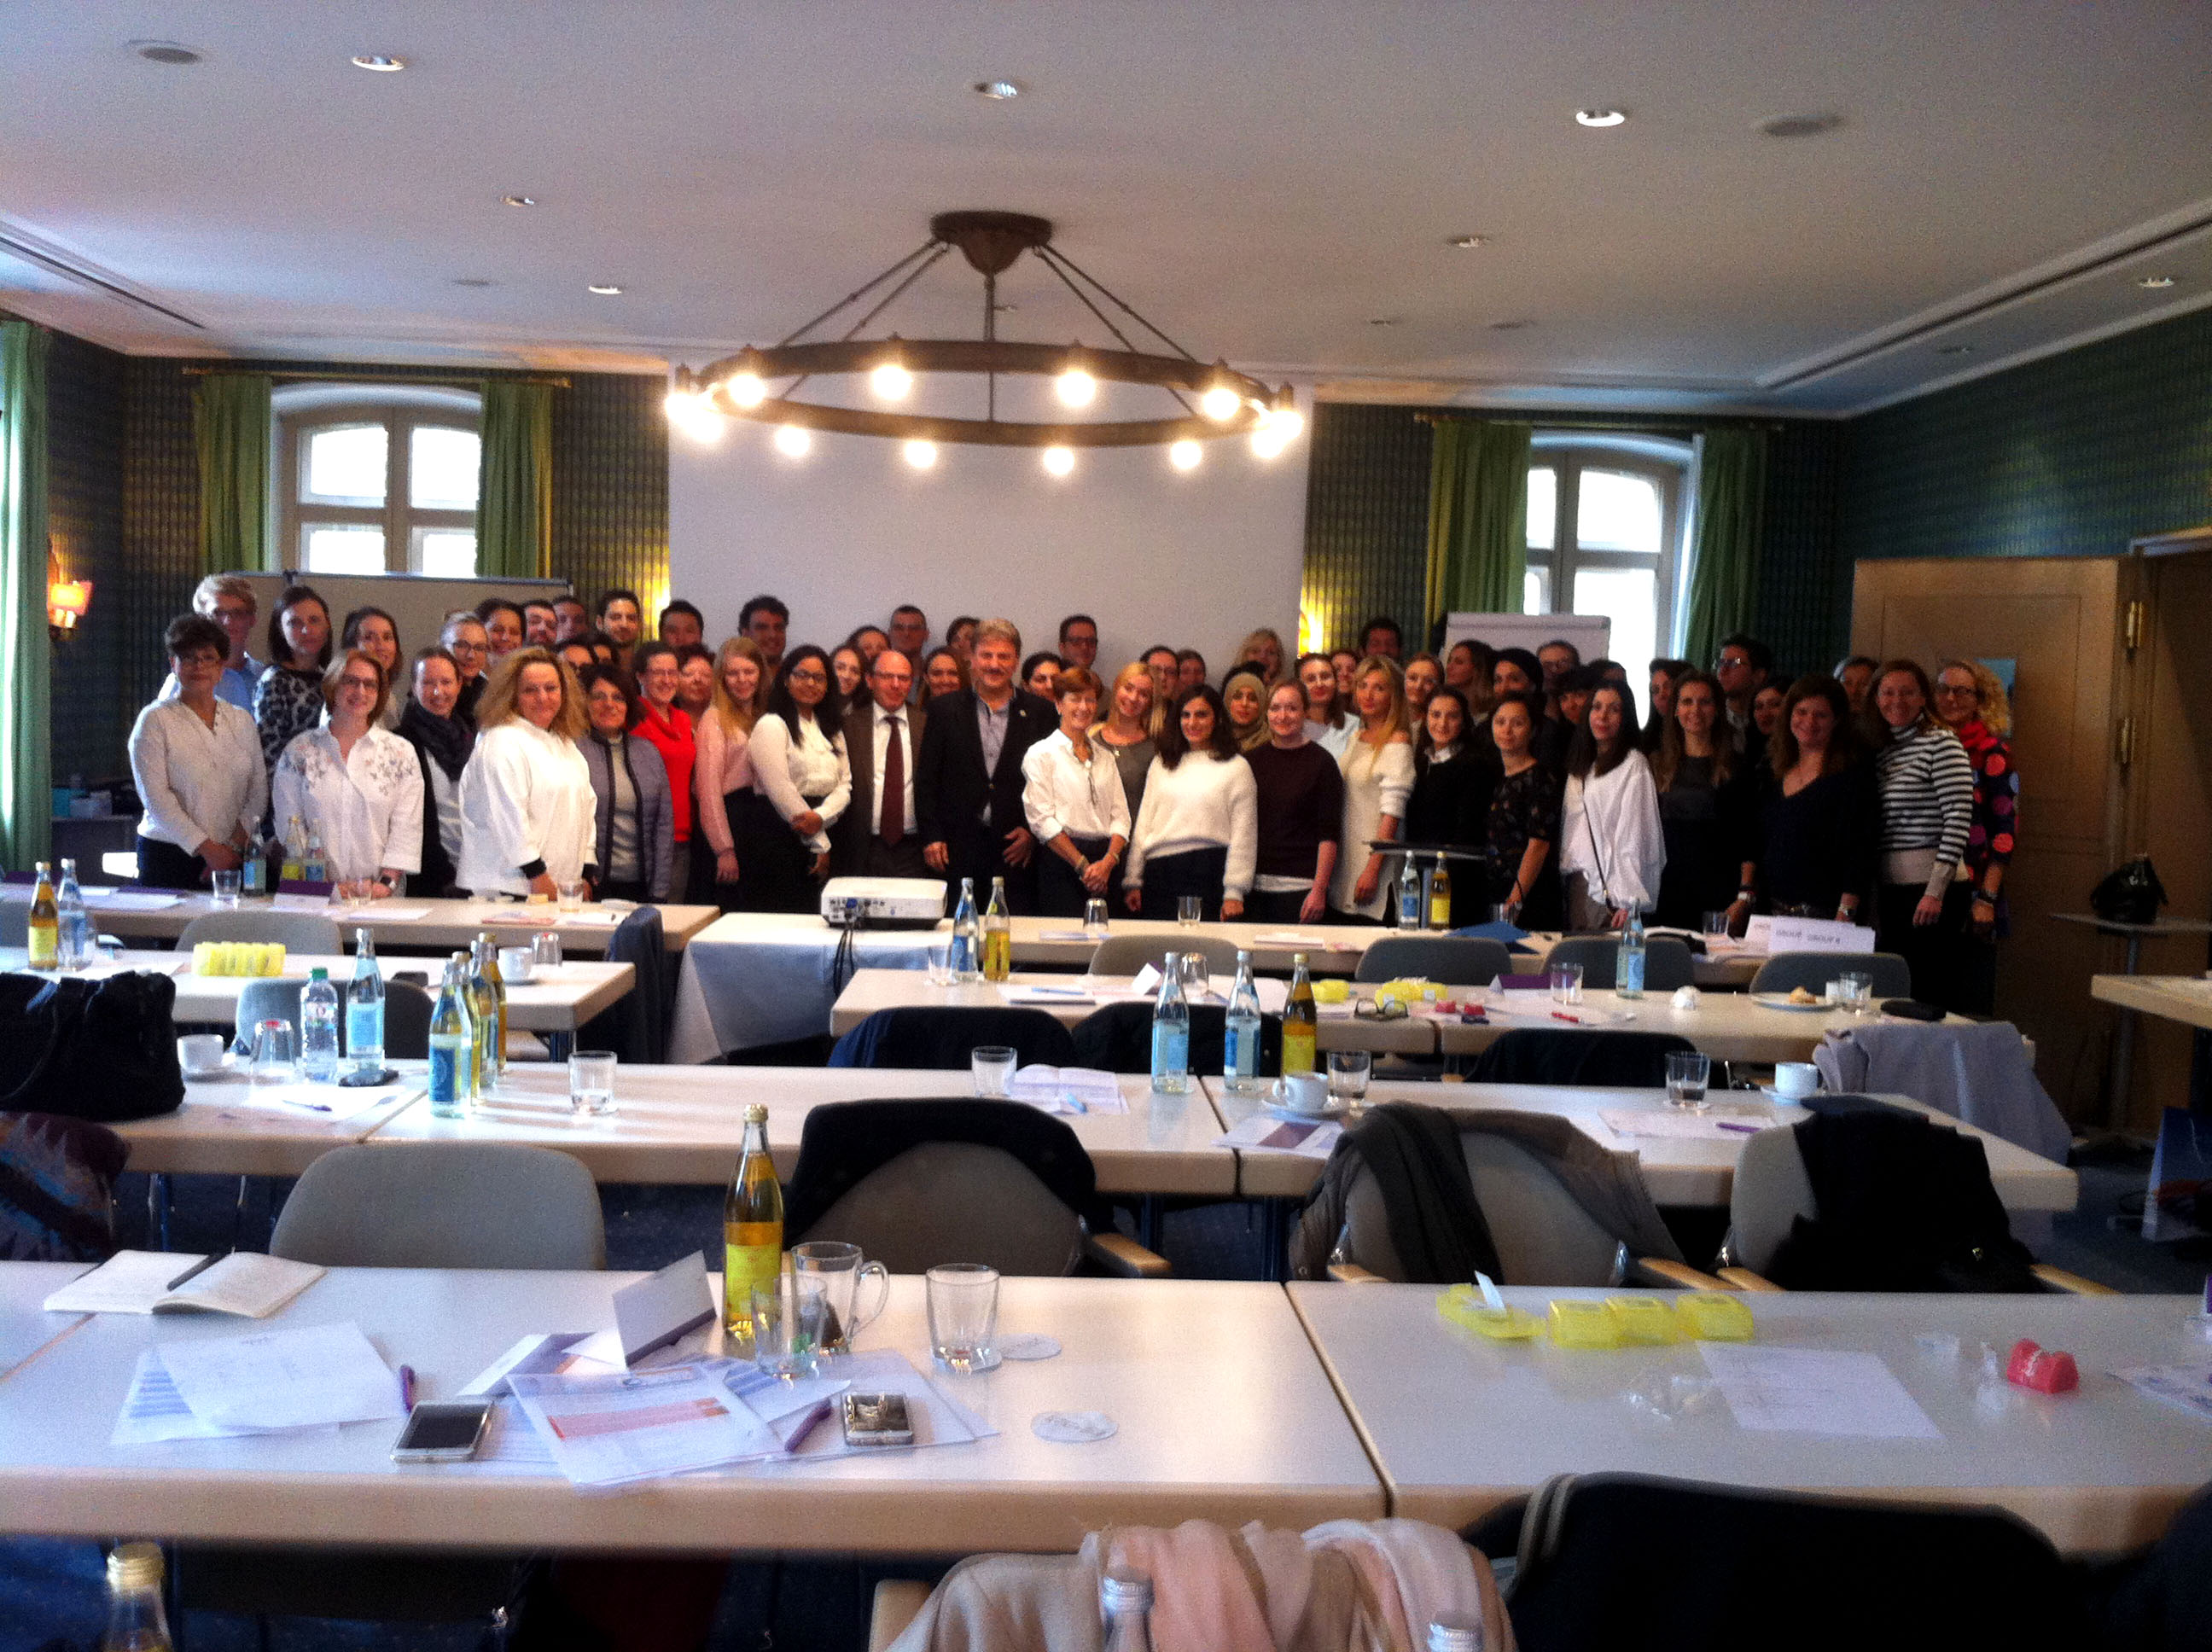 Delegates of the 1st Athena meeting in Munich, 2017